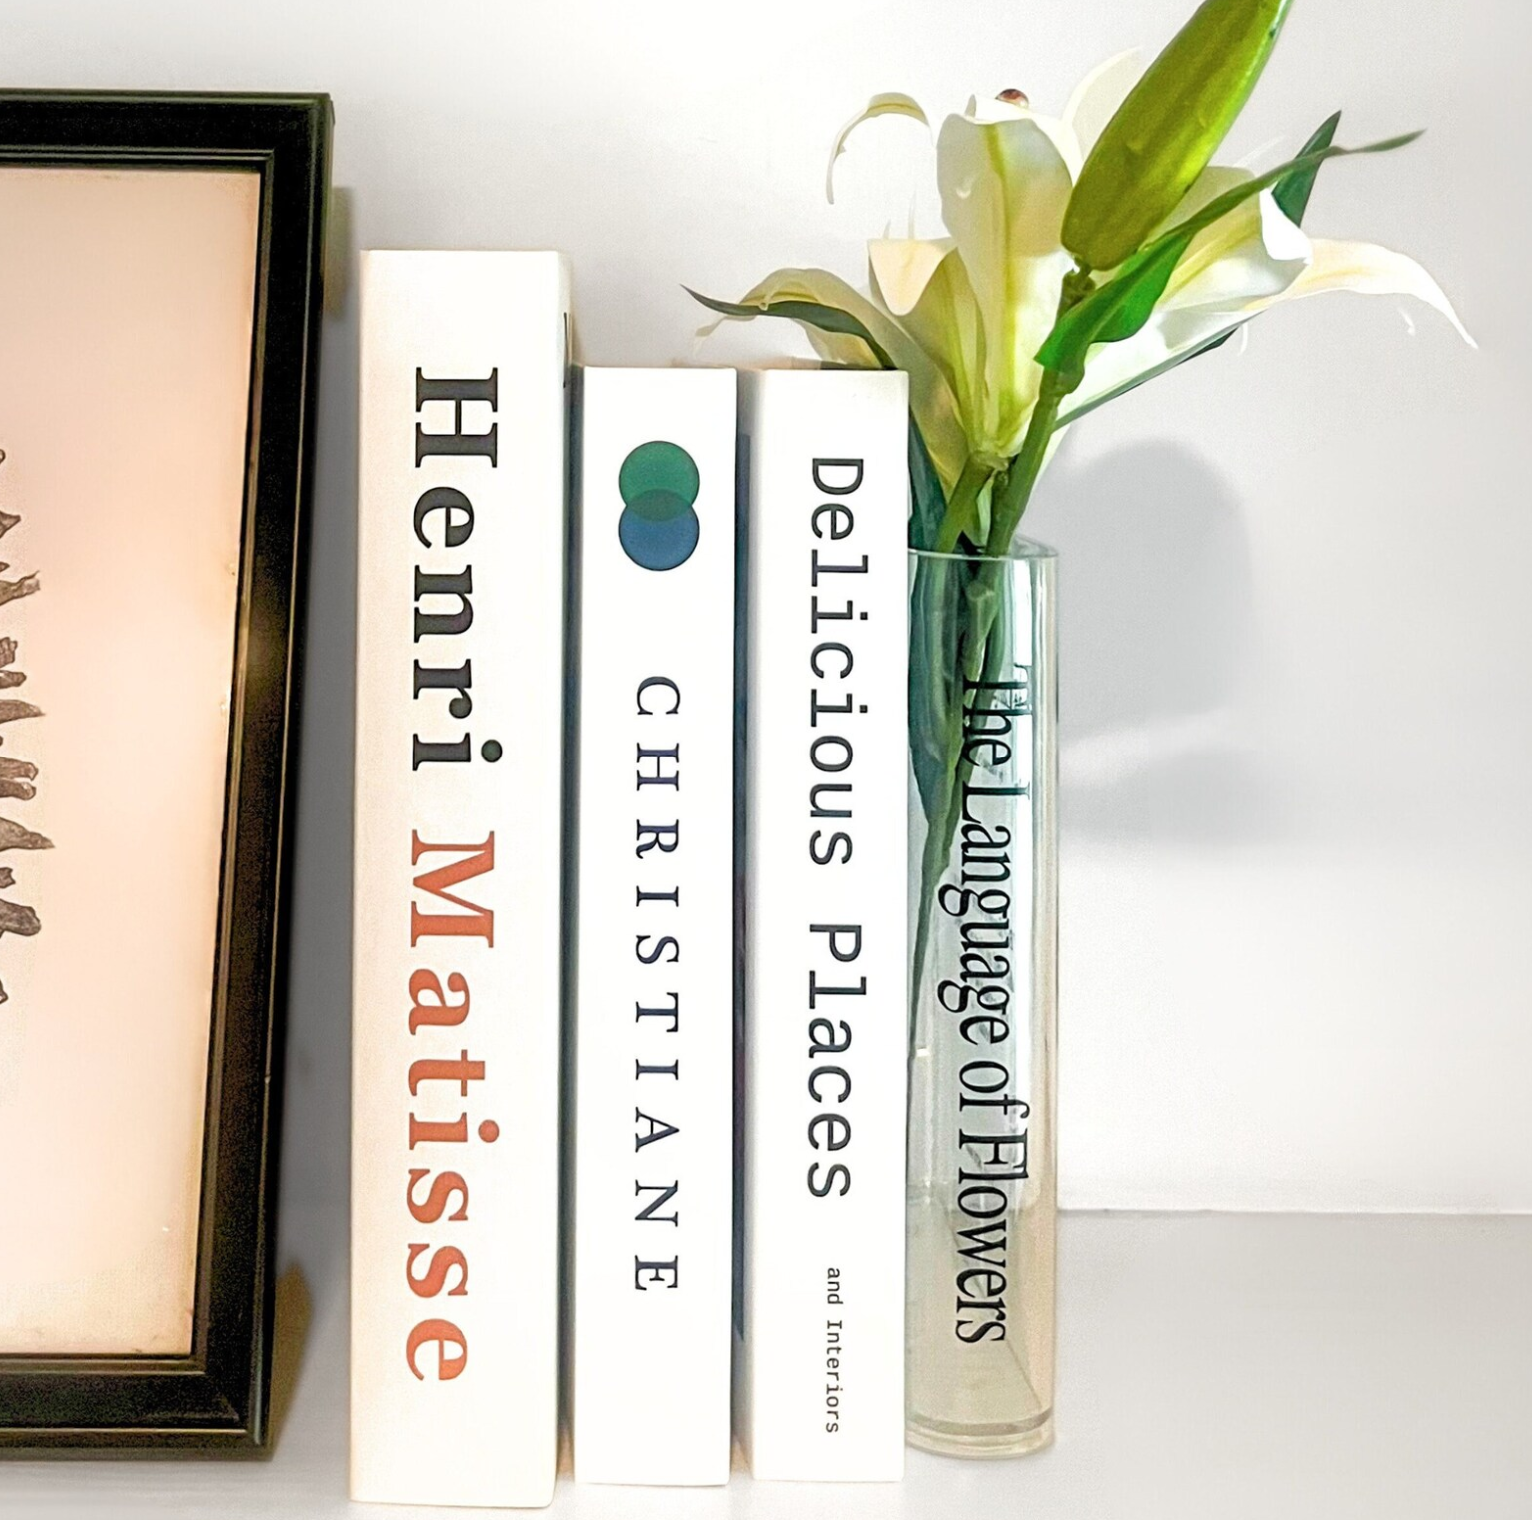 Picture of three white books lined up next to a clear acrylic vase in the shape of a book with green flowers sticking out of it.